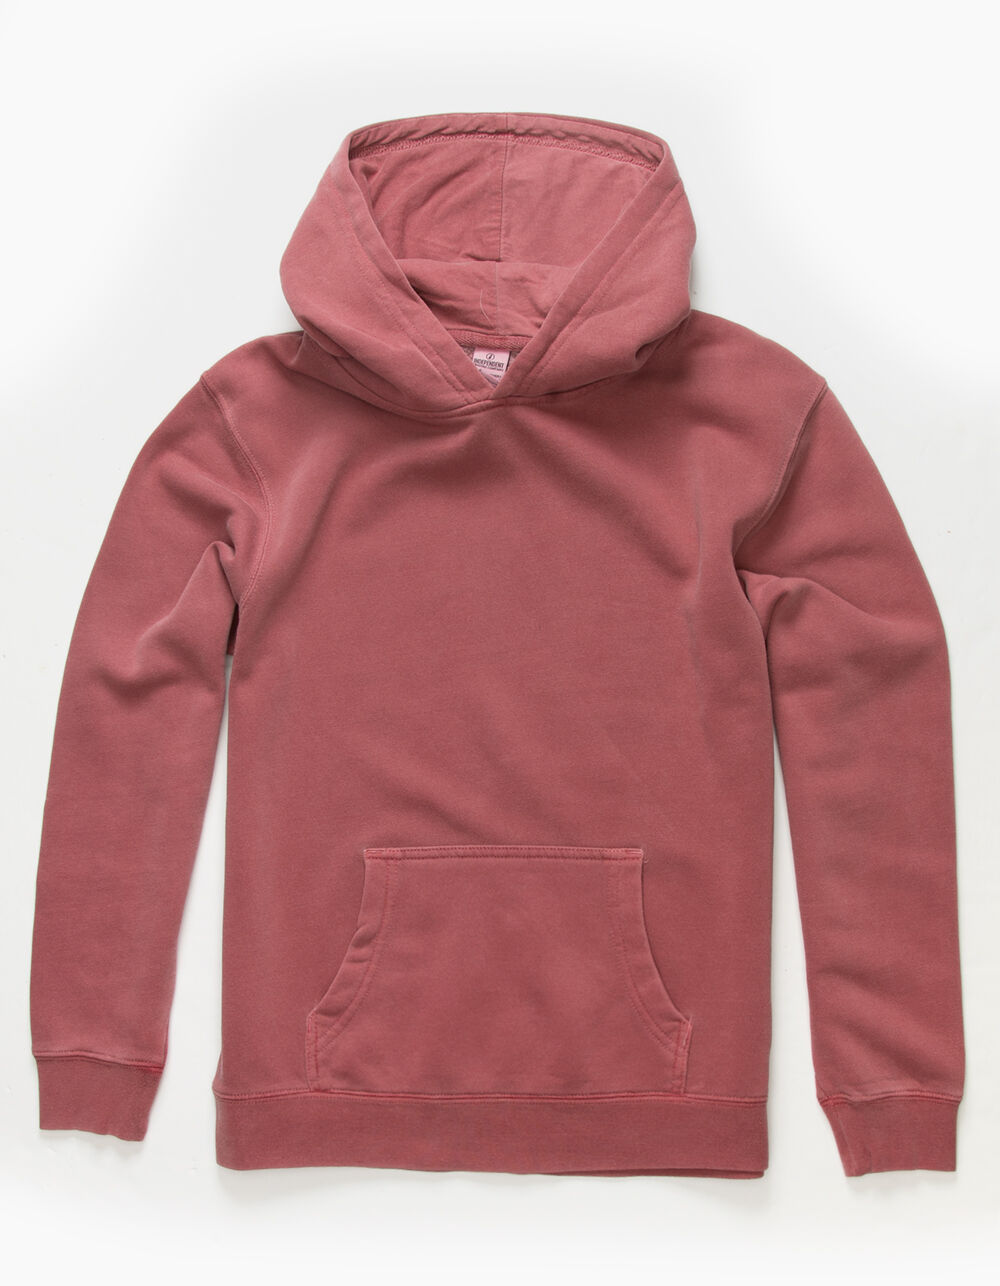 INDEPENDENT TRADING COMPANY Pigment Dye Boys Hoodie - MAROON | Tillys